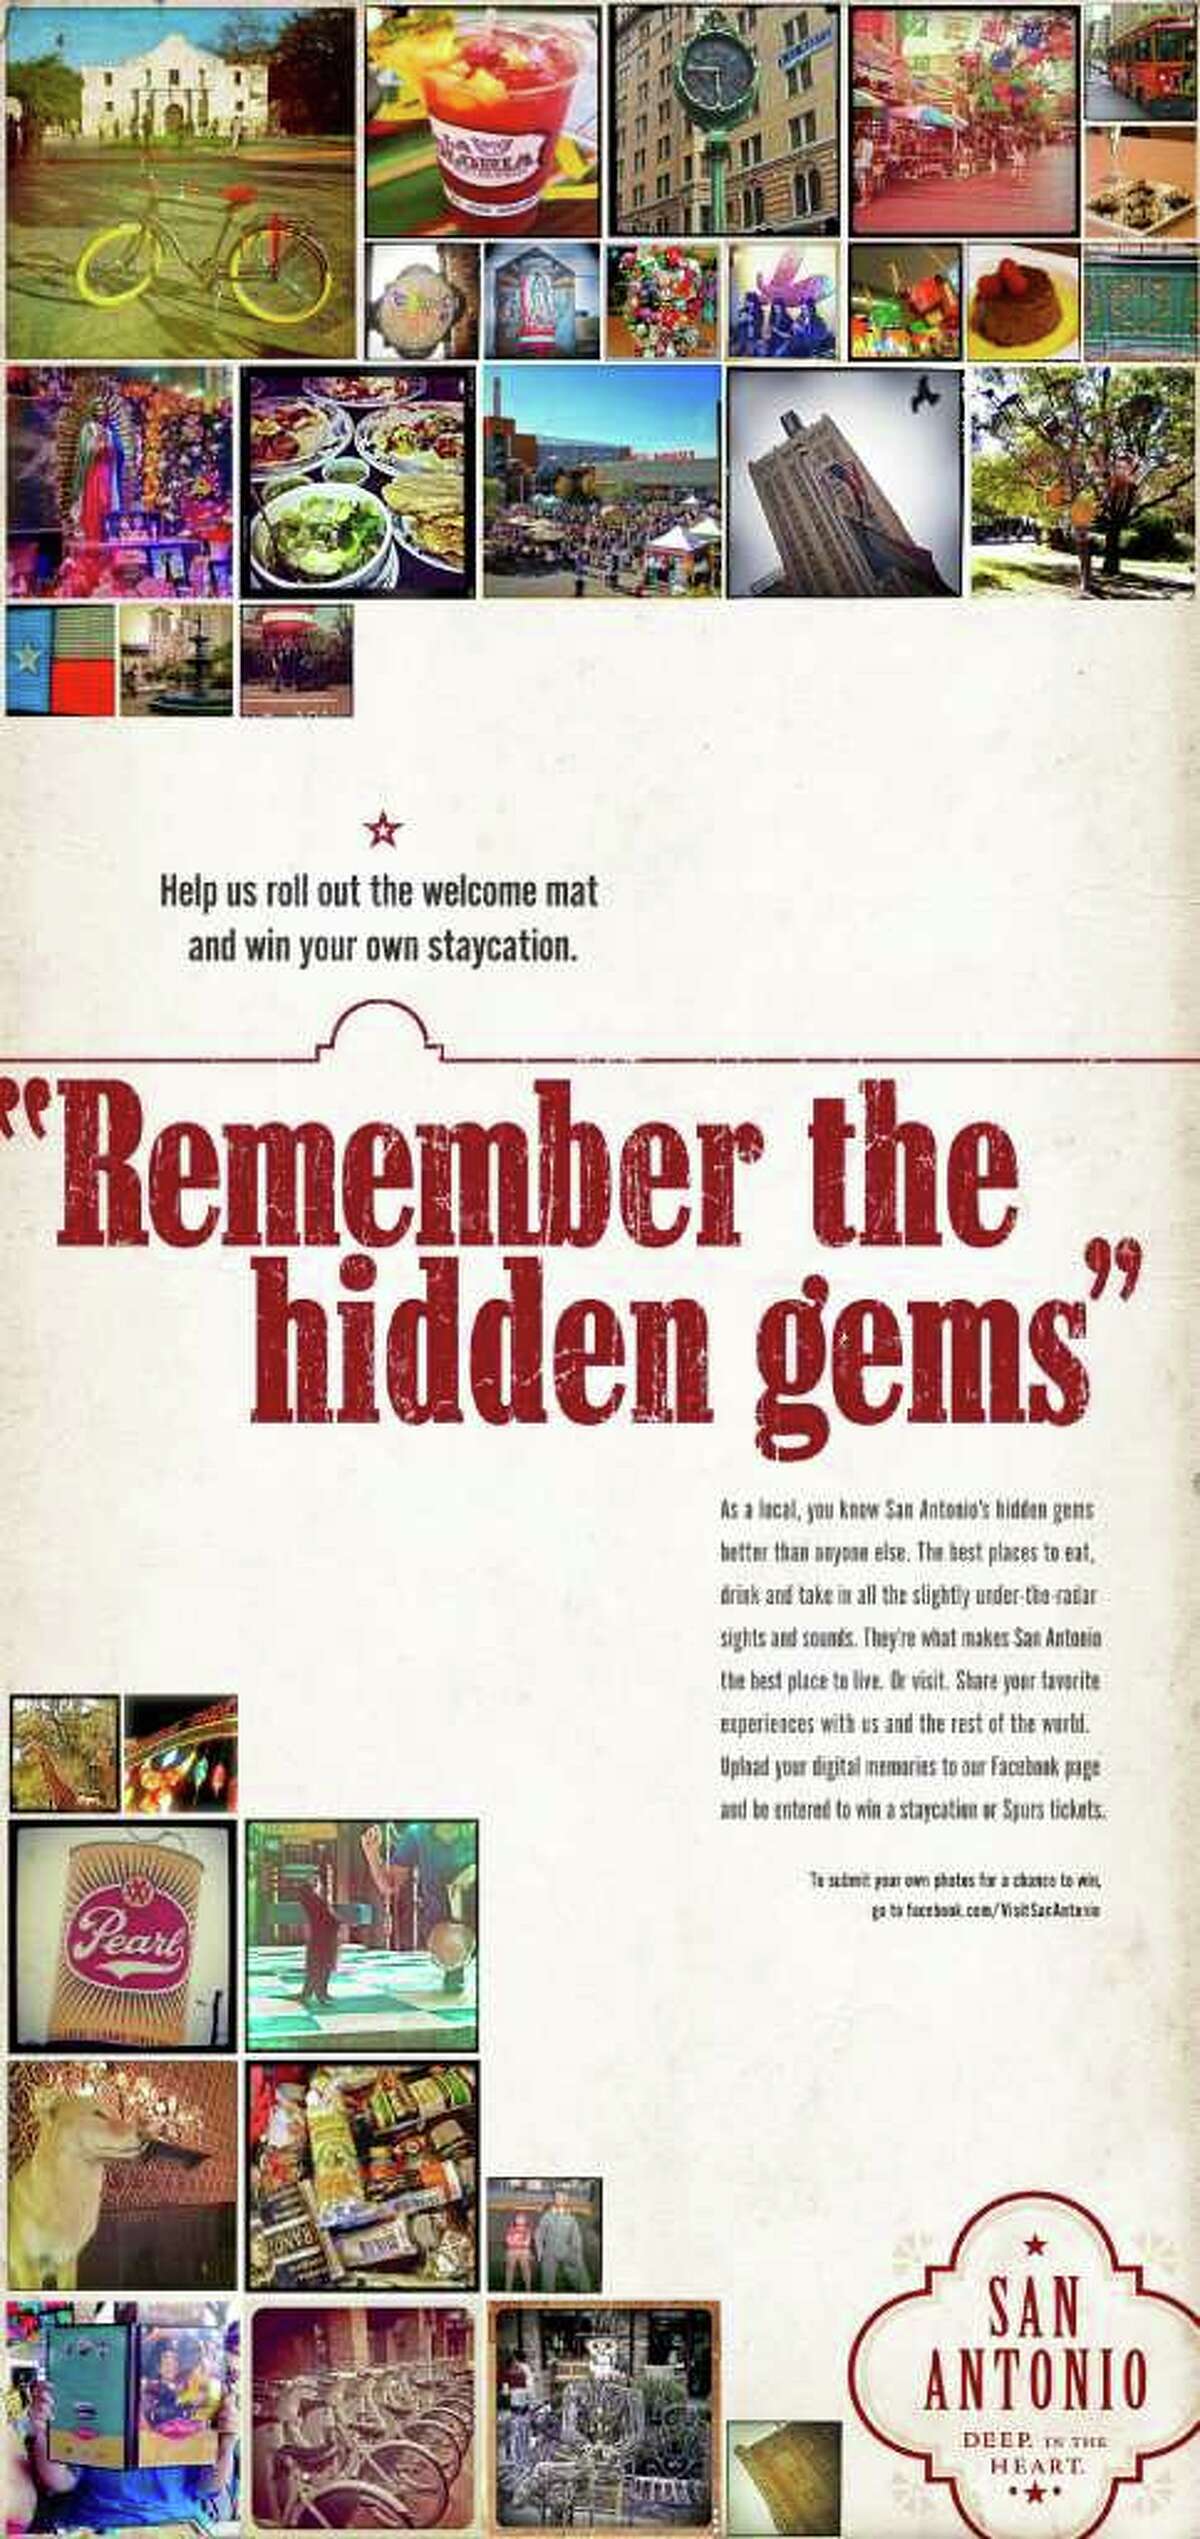 "Remember the Hidden Gems" ad campaign by the San Antonio Convention & Visitors Bureau. A mock-up of a newspaper ad soliciting residents to contribute to the new ad campaign. The ad could start running Sunday.